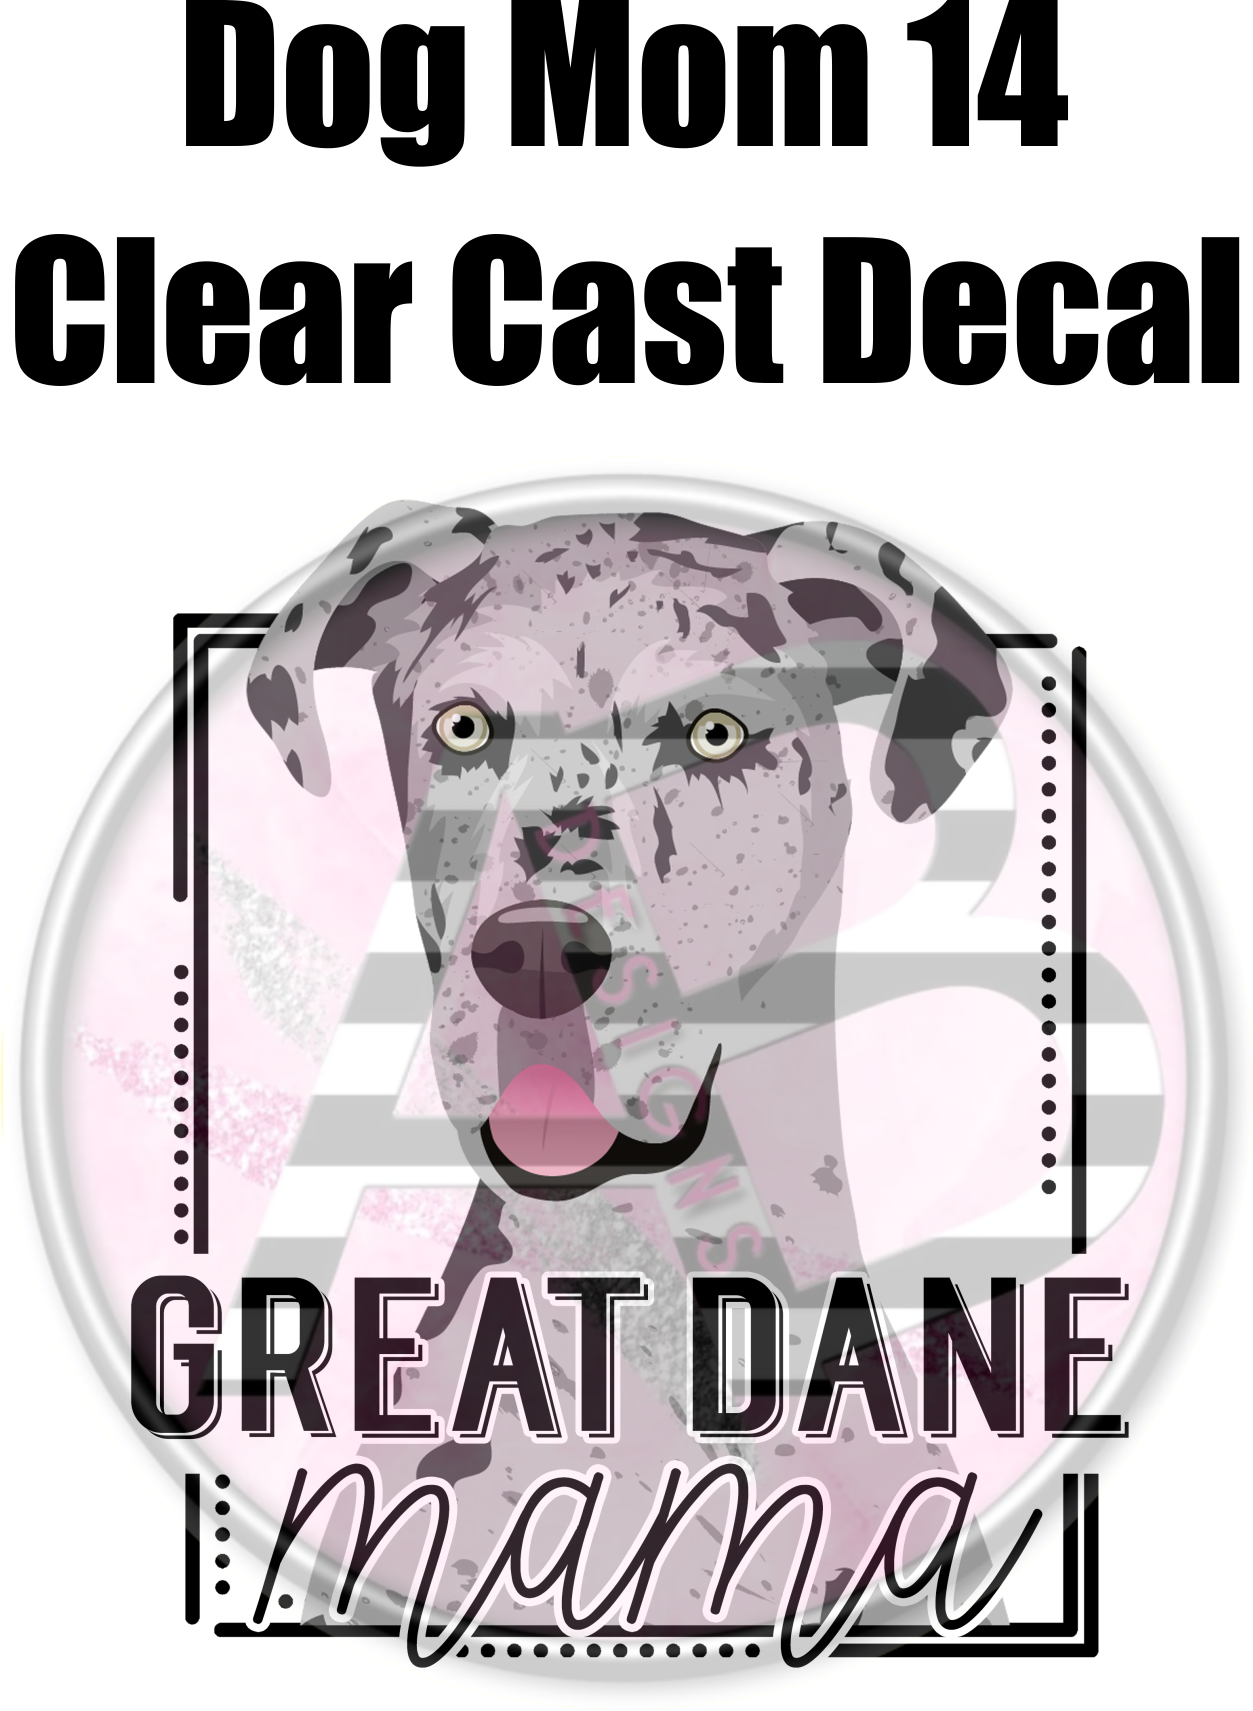 Dog Mom 14 - Clear Cast Decal - 102